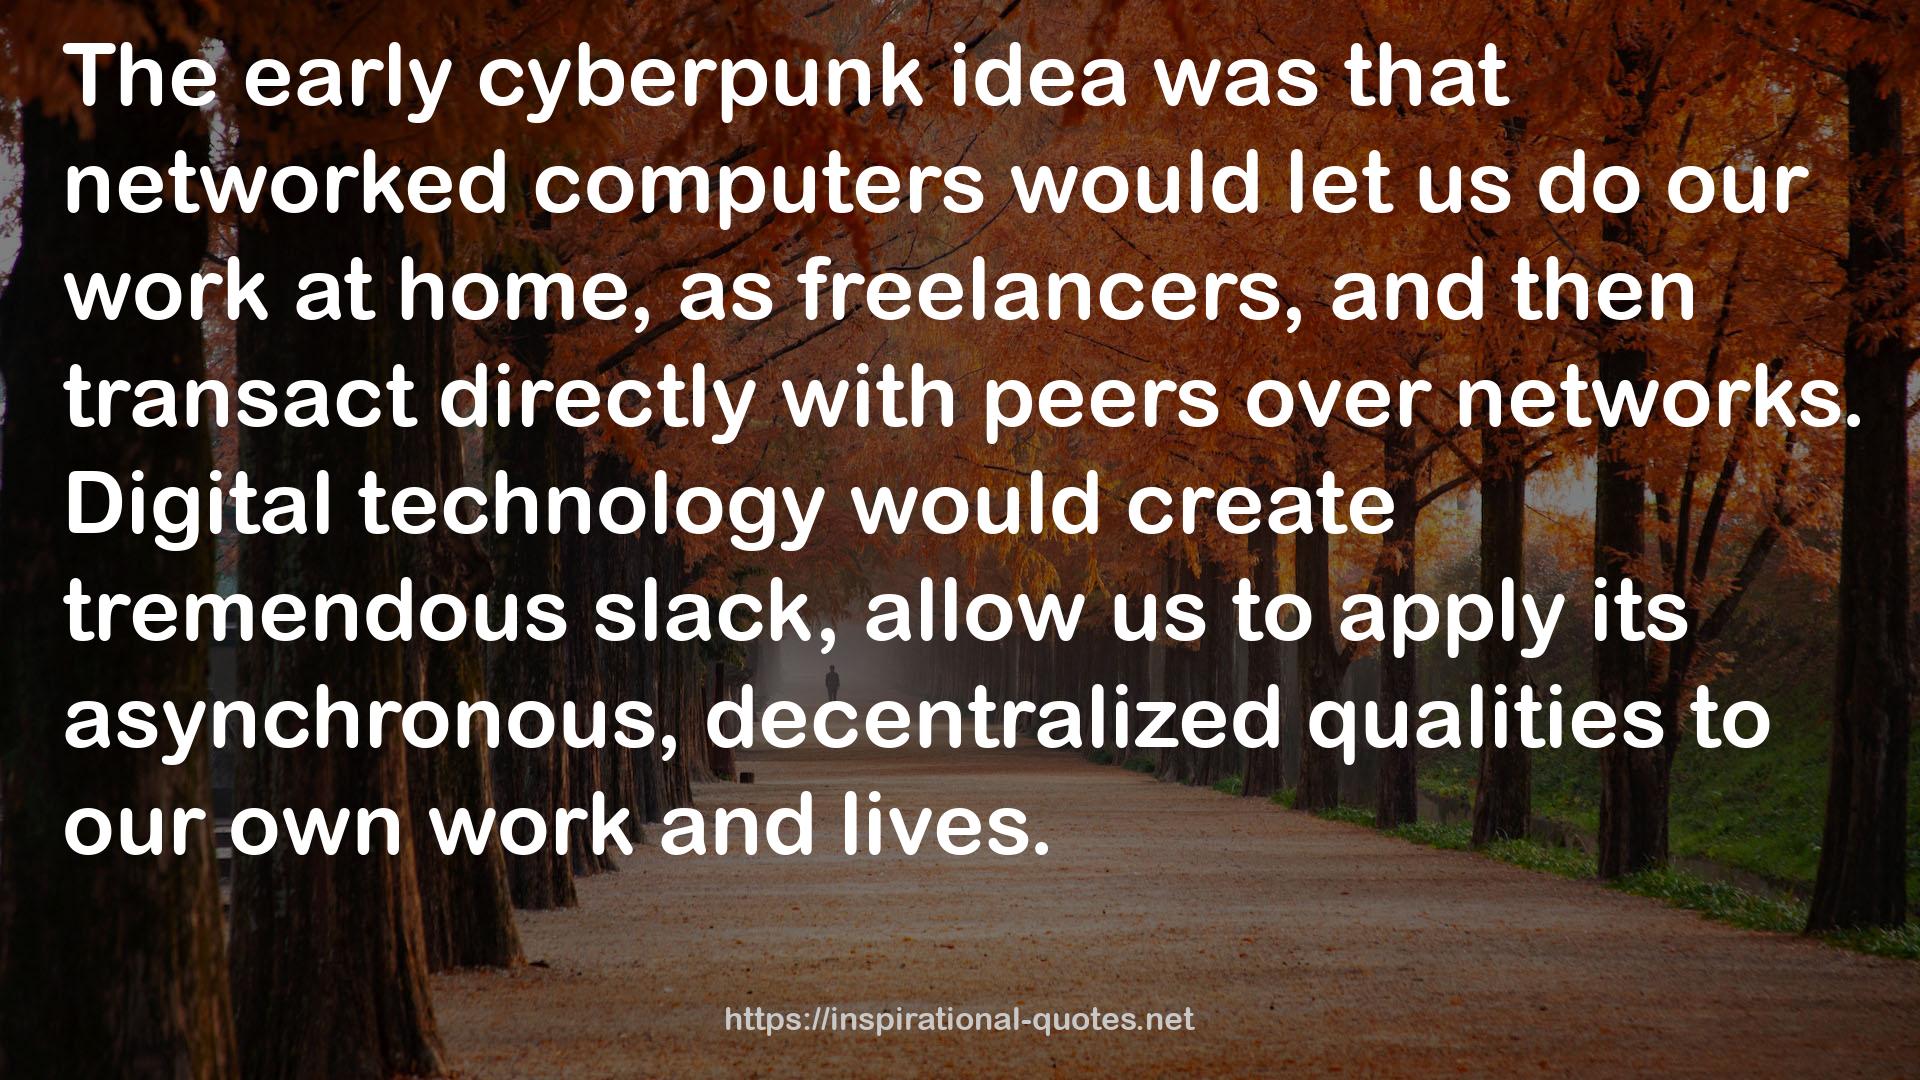 its asynchronous, decentralized qualities  QUOTES